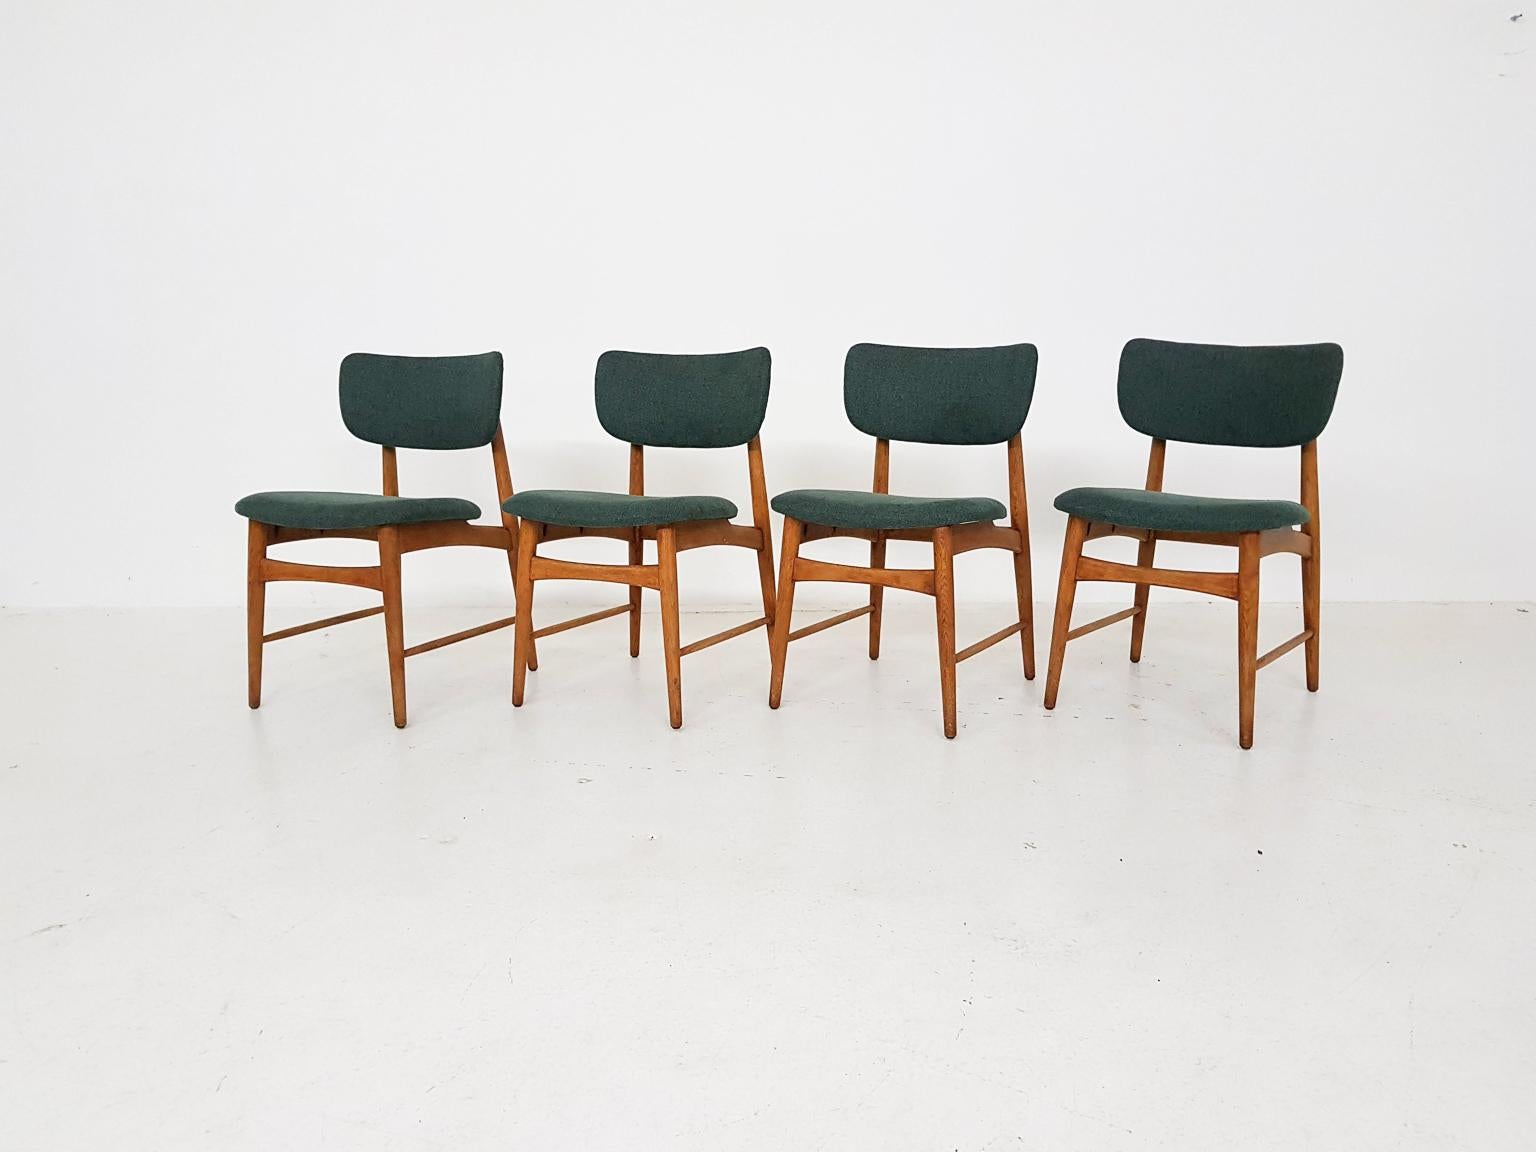 A nice set of oak dining chairs with new green upholstery. 

We think it is a design by the Dutch midcentury furniture manufacturer Bovenkamp, since the oak frame and the shape of the seating and back remind us of other designs. Besides those